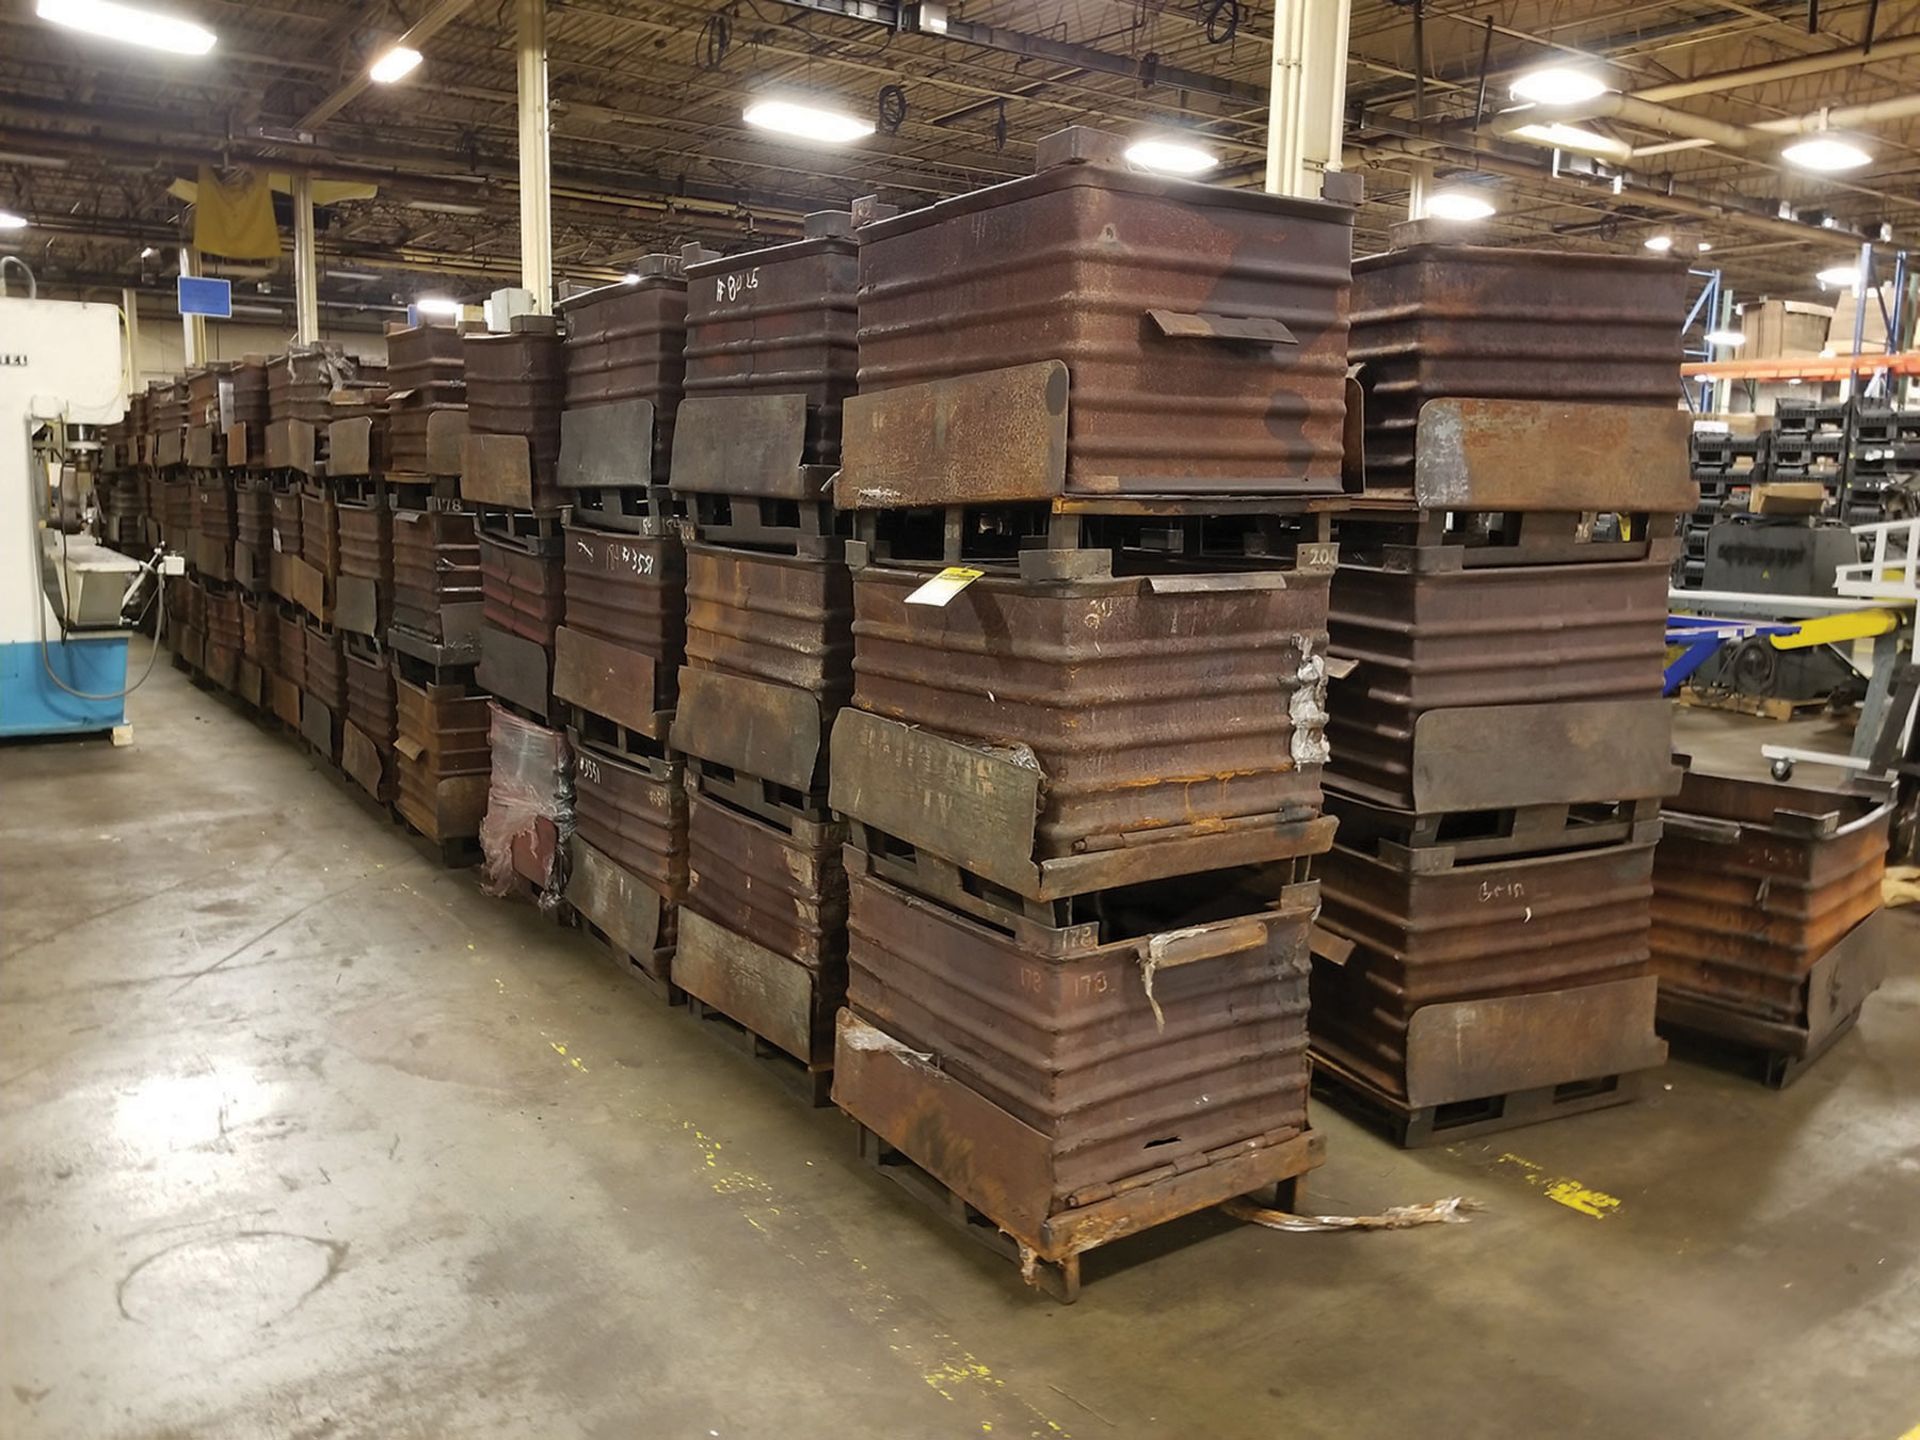 (160) 23- 26'' X 25-29'' X 16-20'' DEEP DUMPING STEEL PARTS BINS; SOME VARYING SIZES WITHIN COUNT - Image 3 of 6